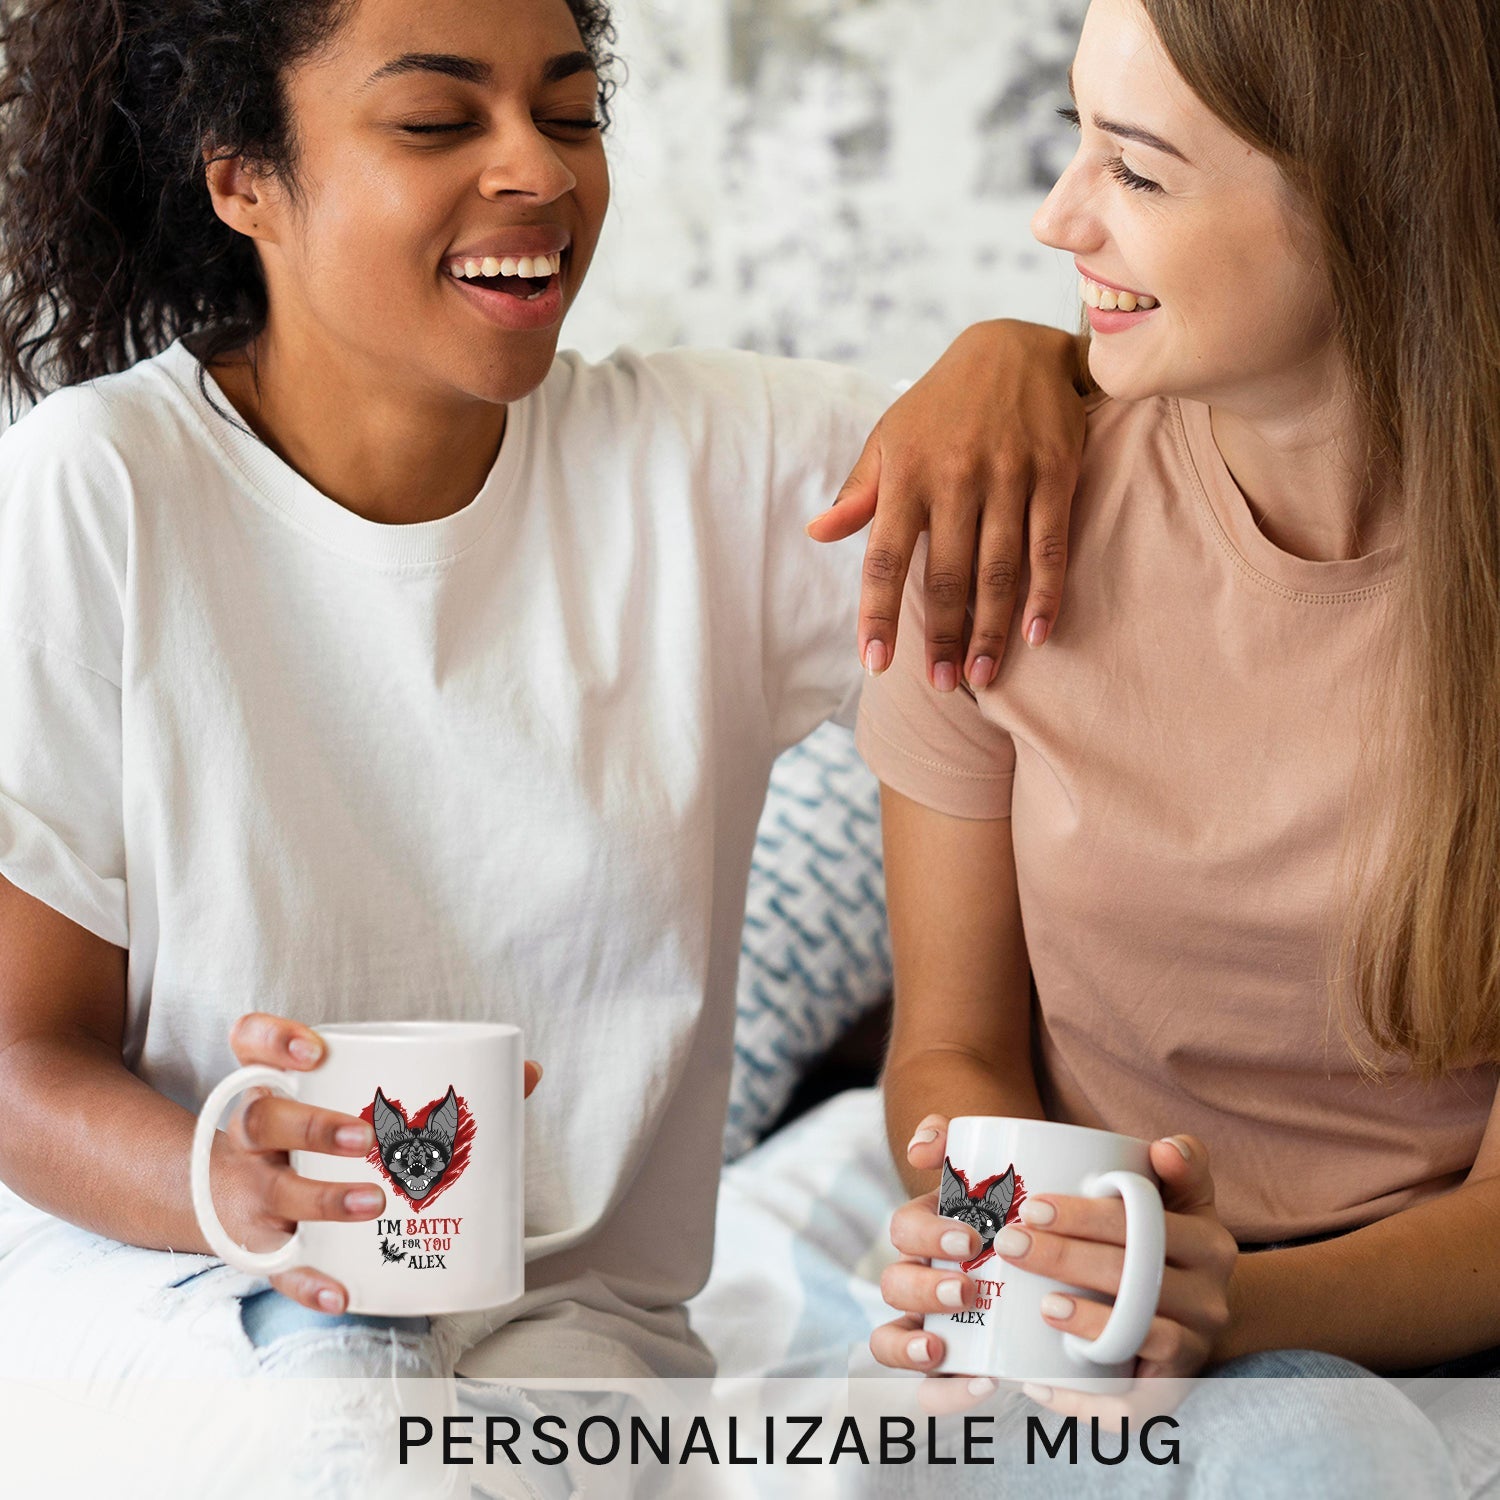 I'm Batty For You - Personalized Anniversary or Halloween gift for Boyfriend or Girlfriend - Custom Mug - MyMindfulGifts